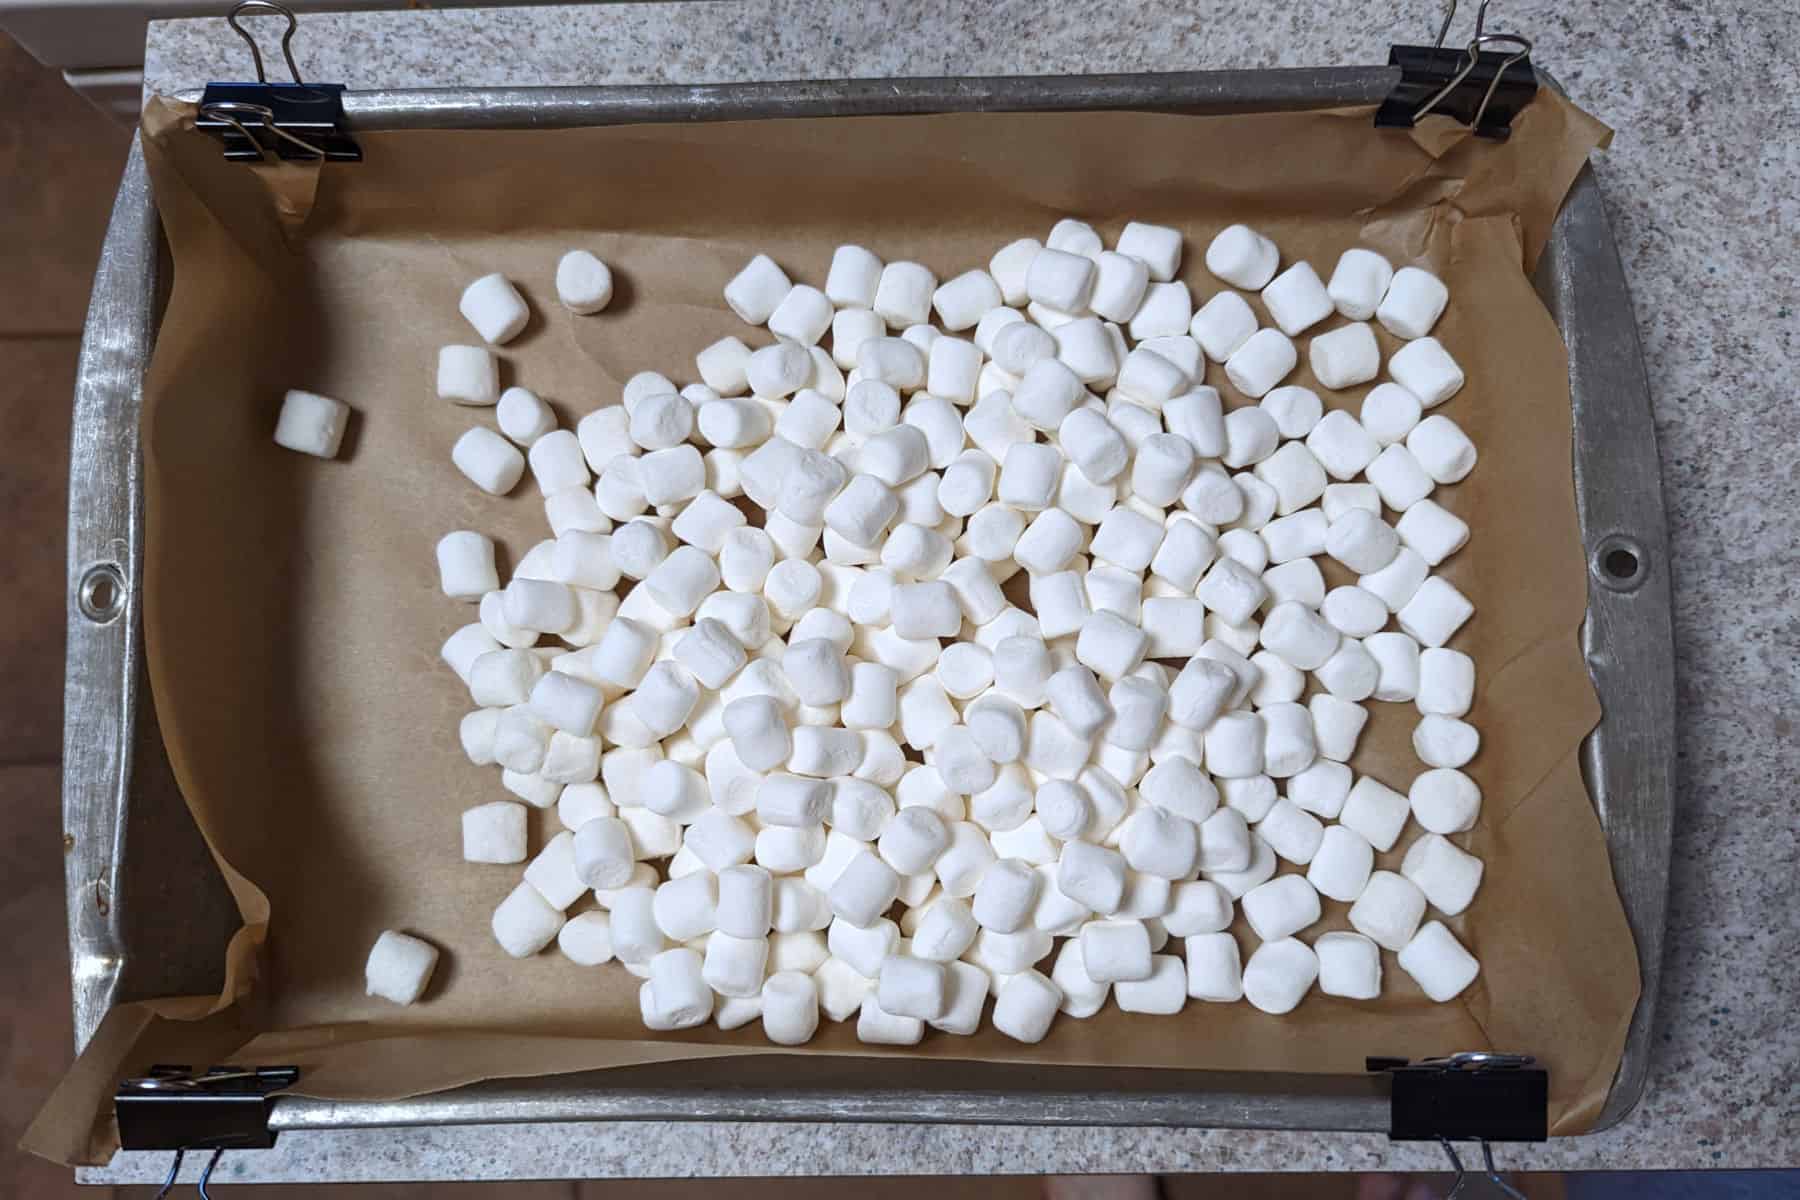 marshmallows in a parchment-lined 9x13 inch pan